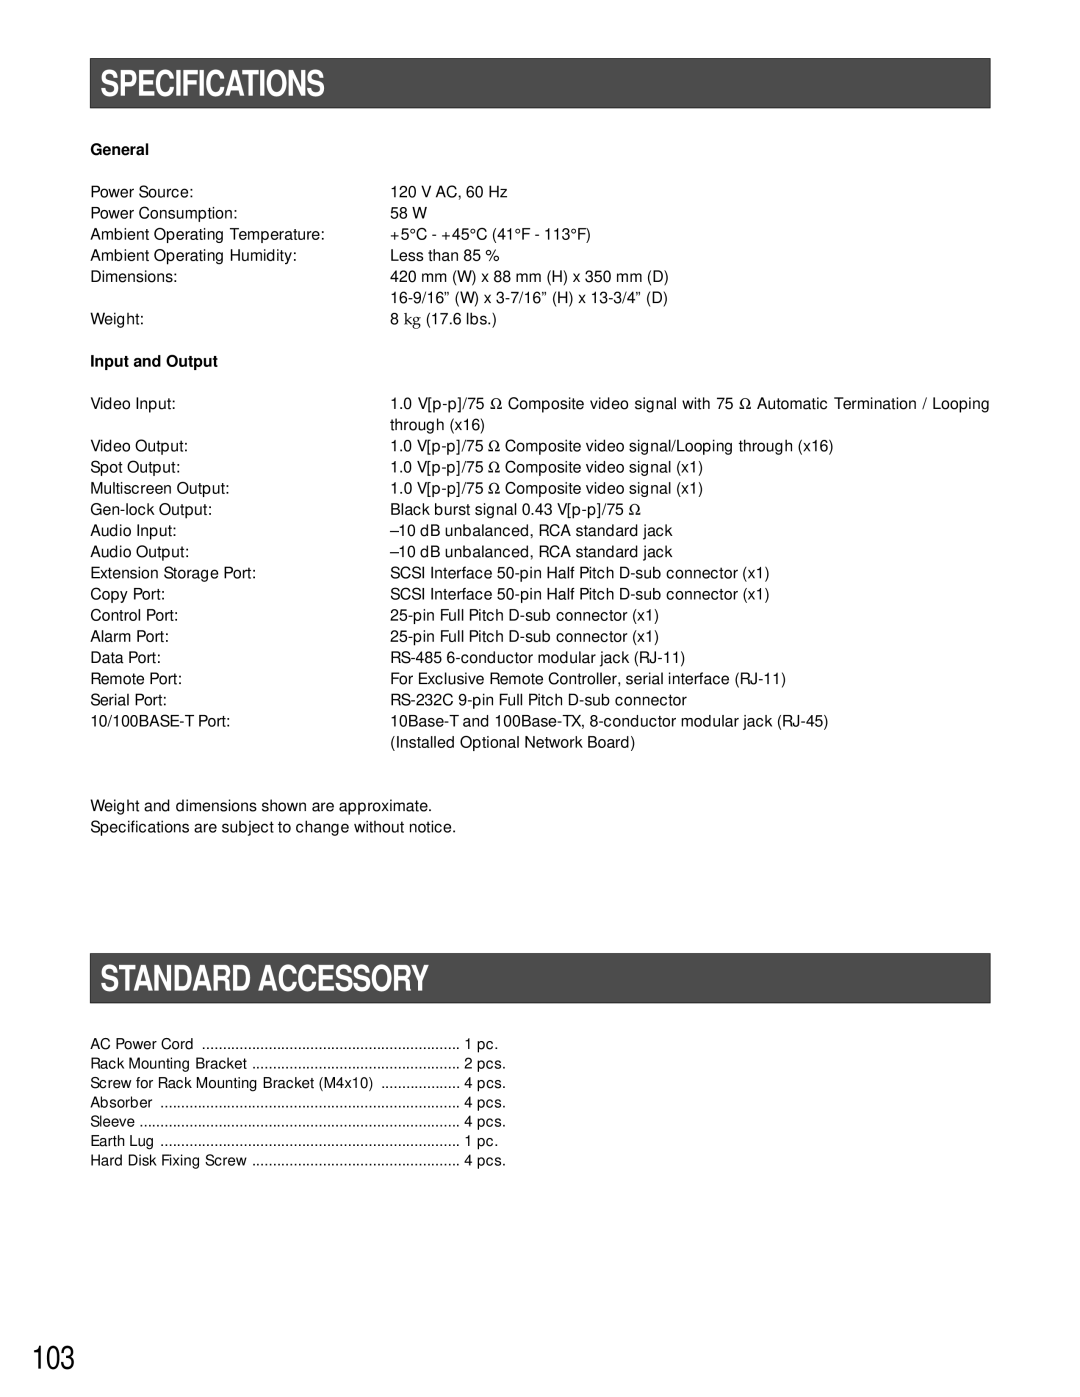 Panasonic WJ-HD500A manual Specifications, Standard Accessory, General, Input and Output 